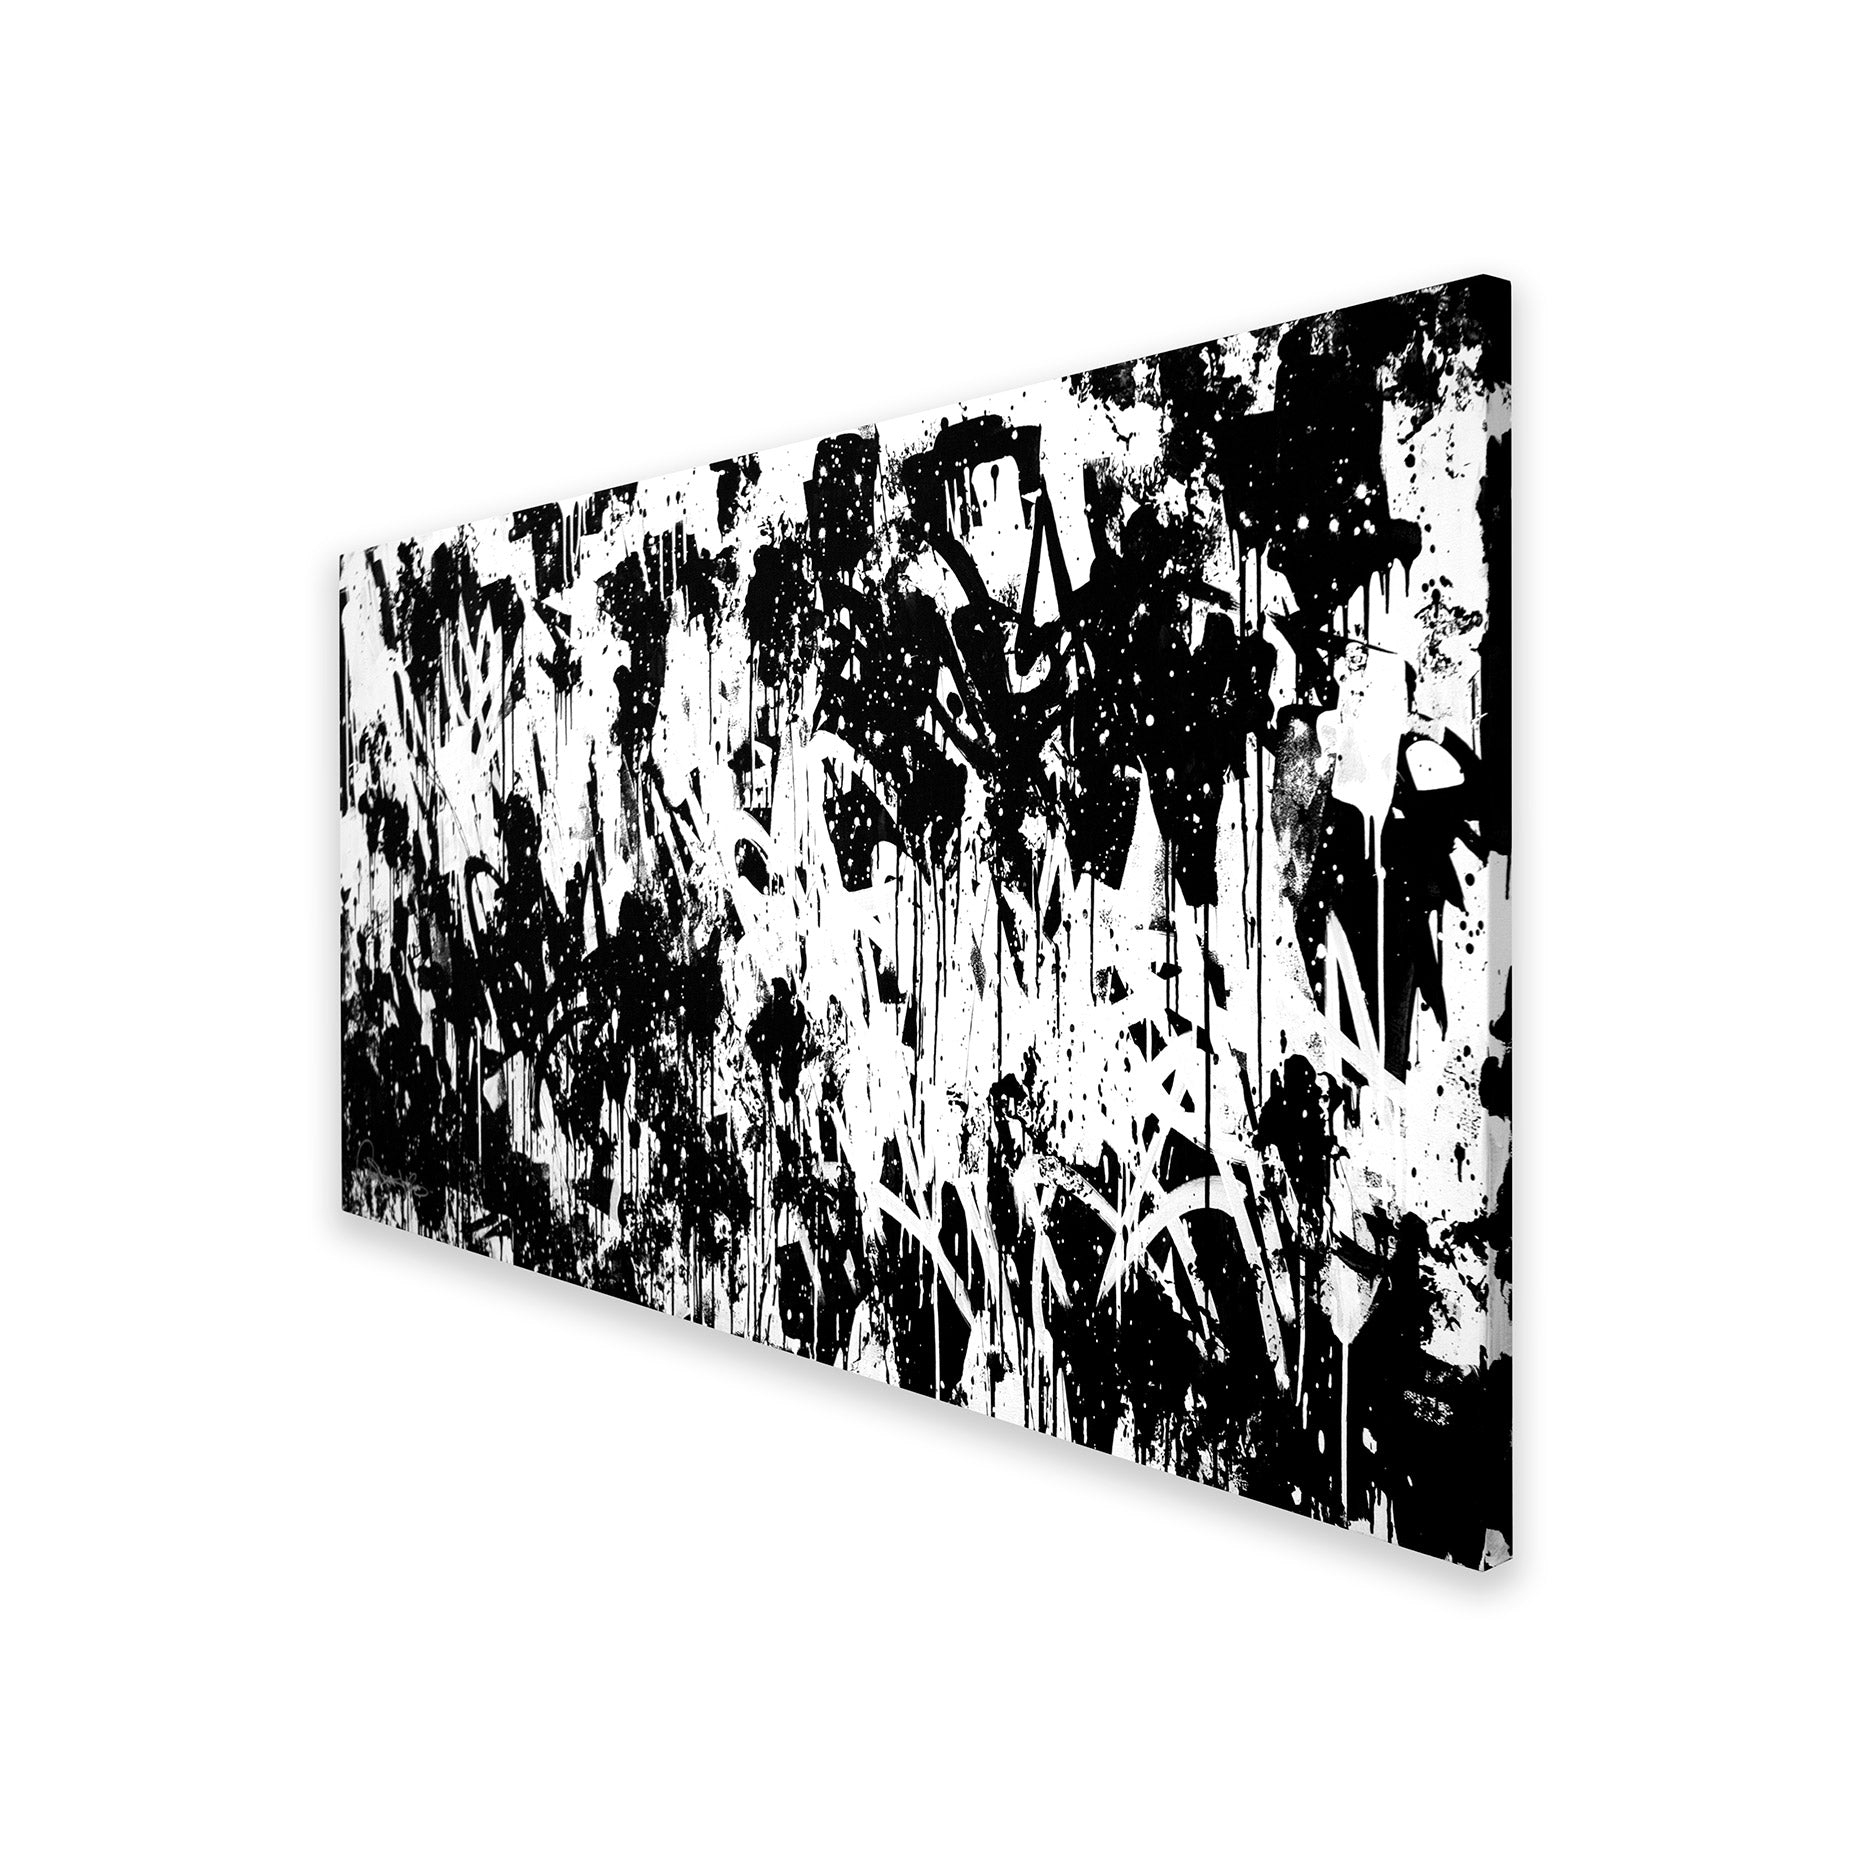 PEACE IN THE CHAOS - 90x200 - Bisco Smith